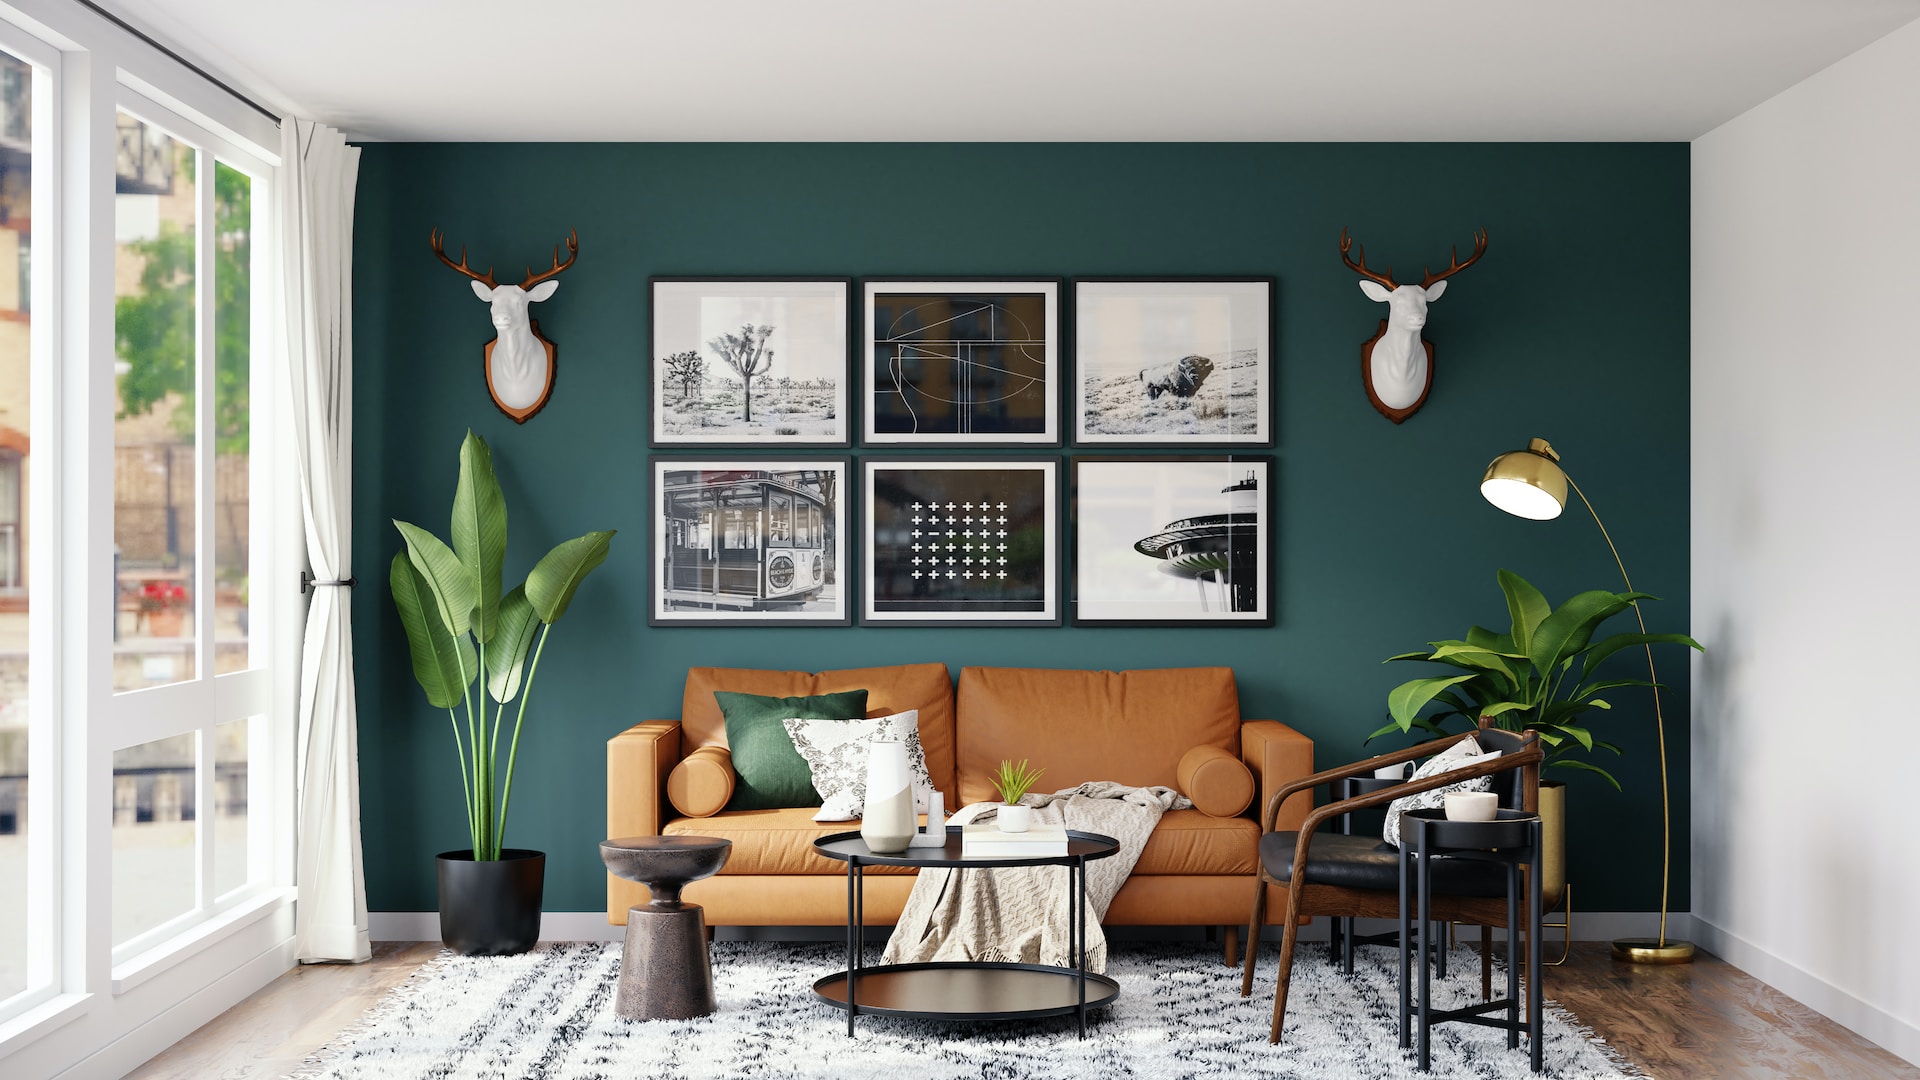 Room with a green wall, brown couch, and other decorations